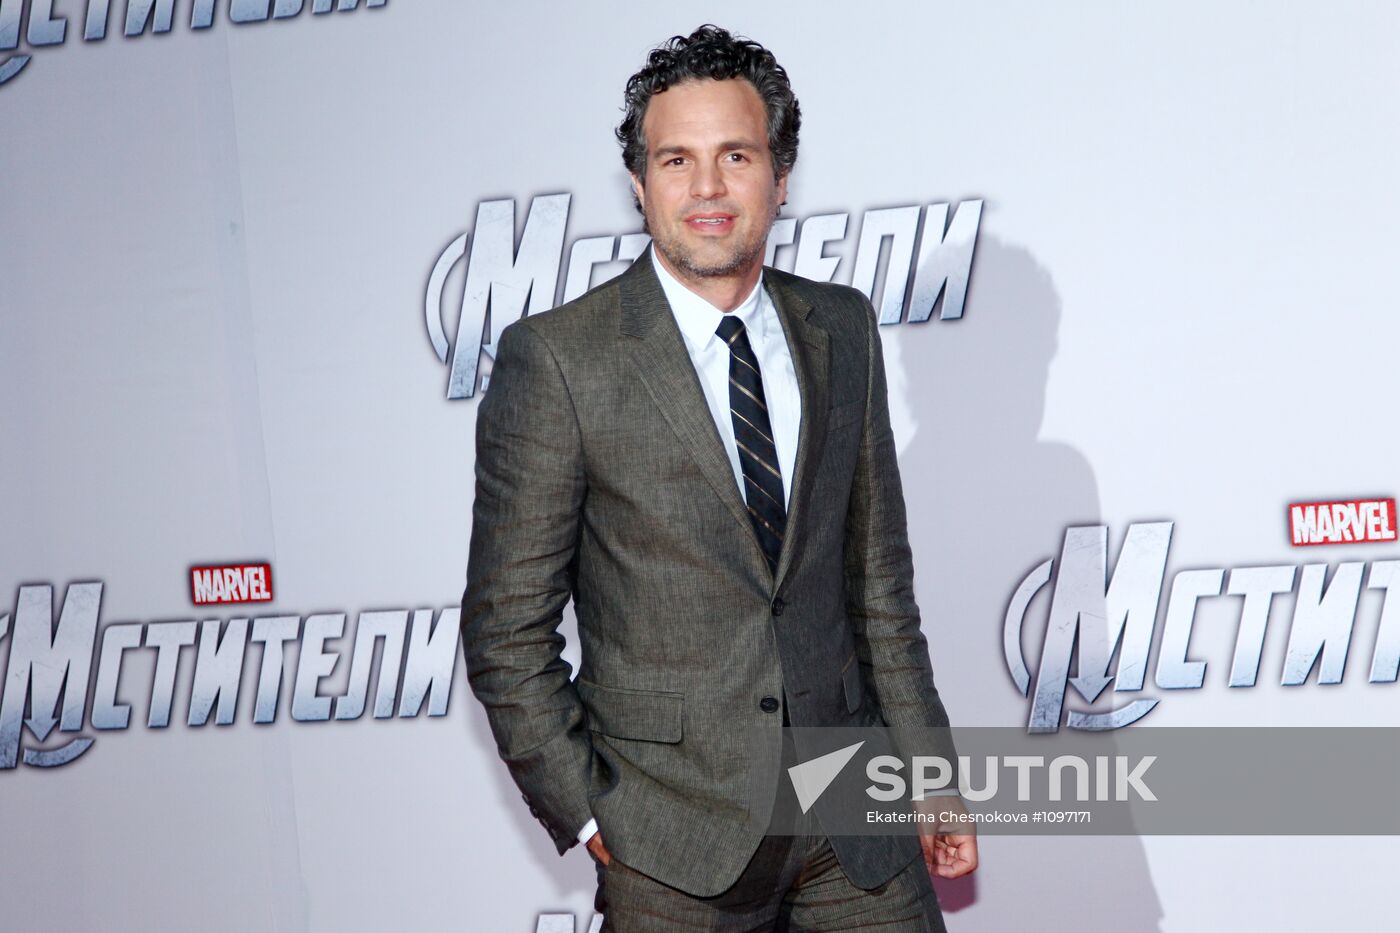 Film by director Joss Whedon "The Avengers" premieres in Moscow